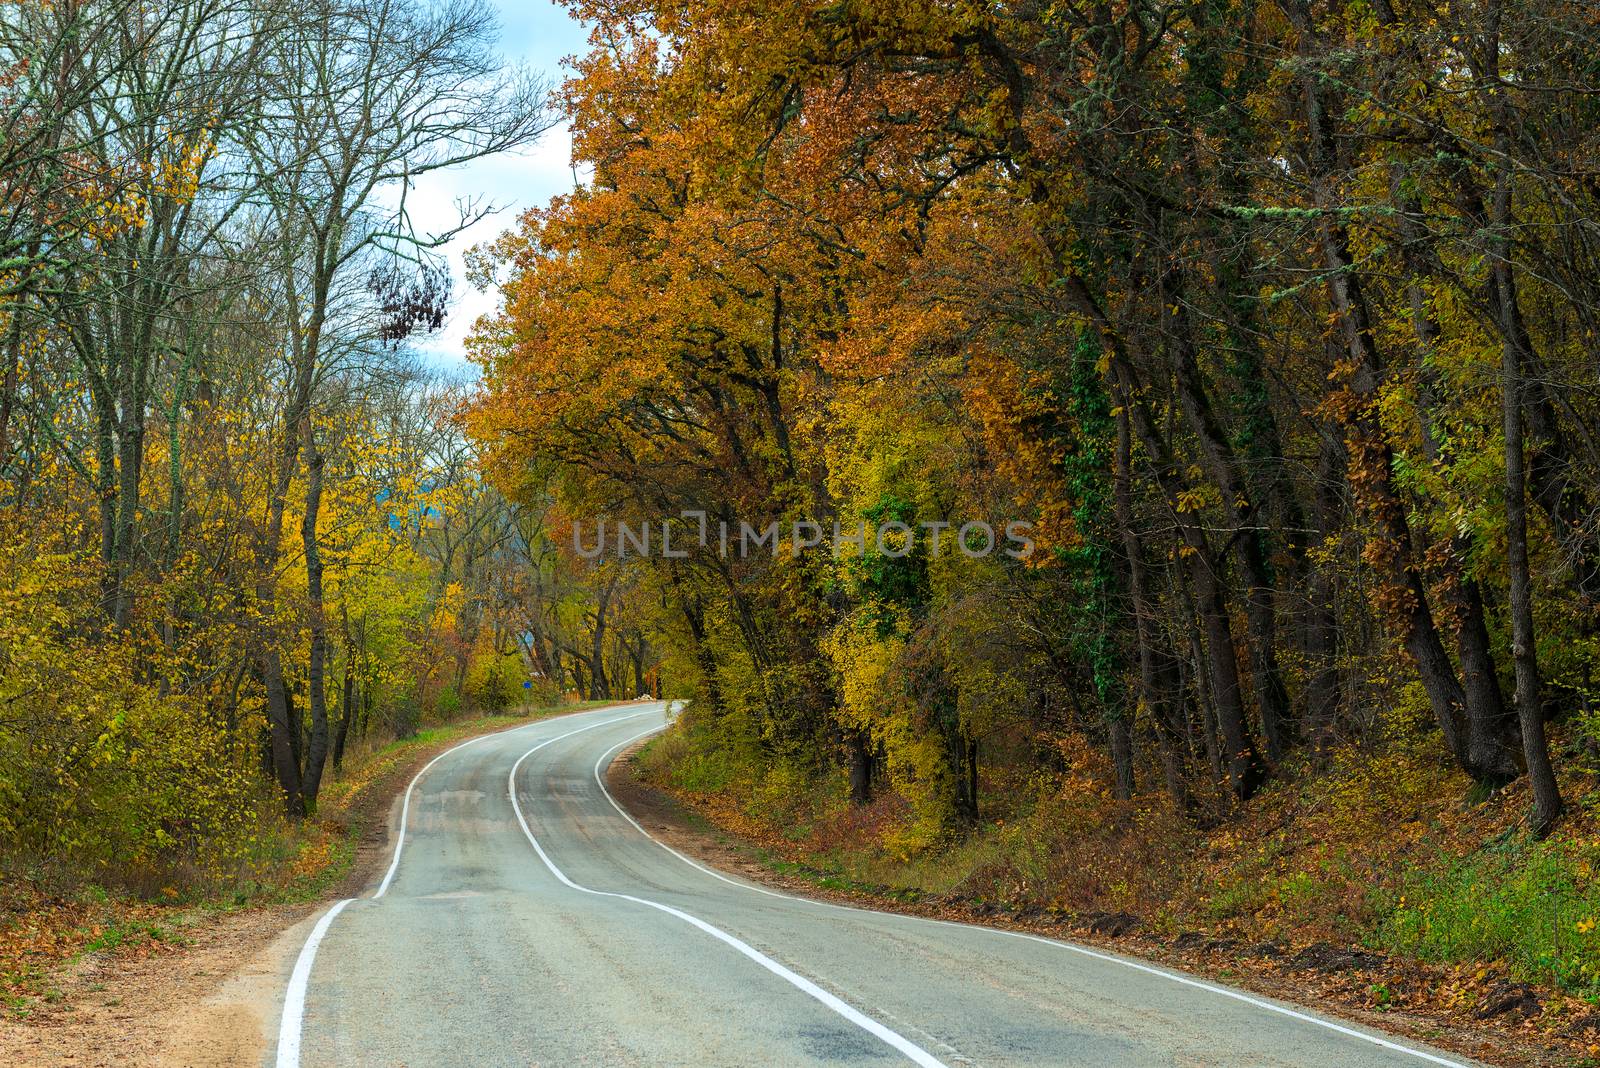 Car winding road in the mountains on an autumn afternoon by kosmsos111